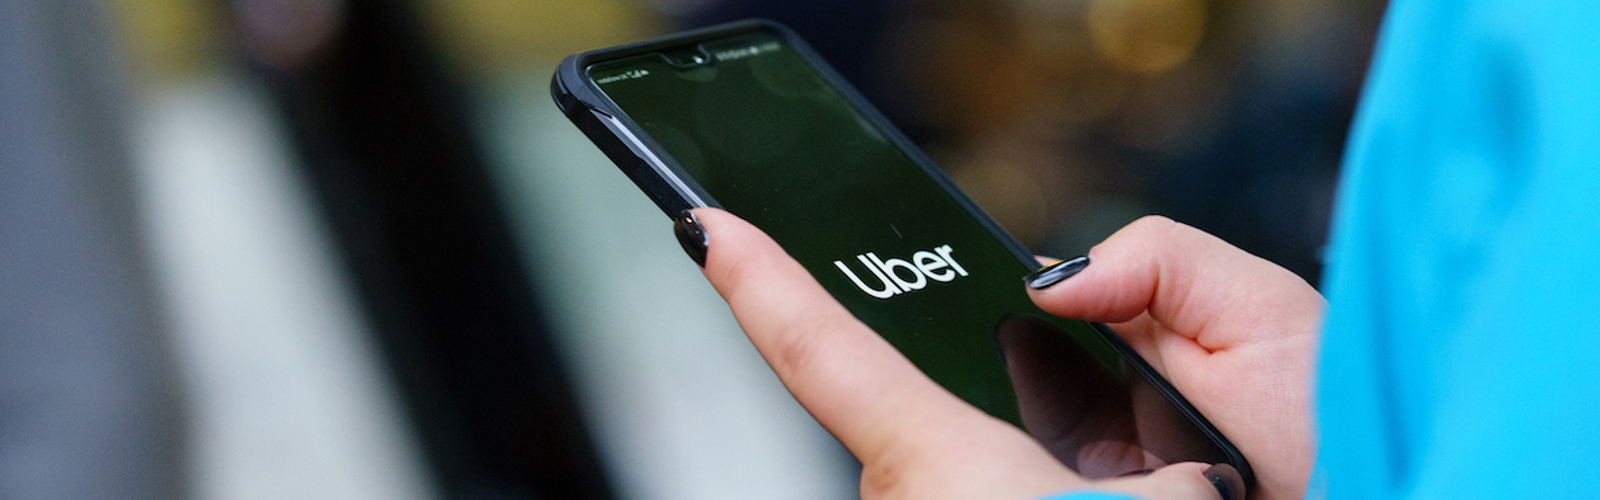 A woman holds a smartphone displaying the Uber logo